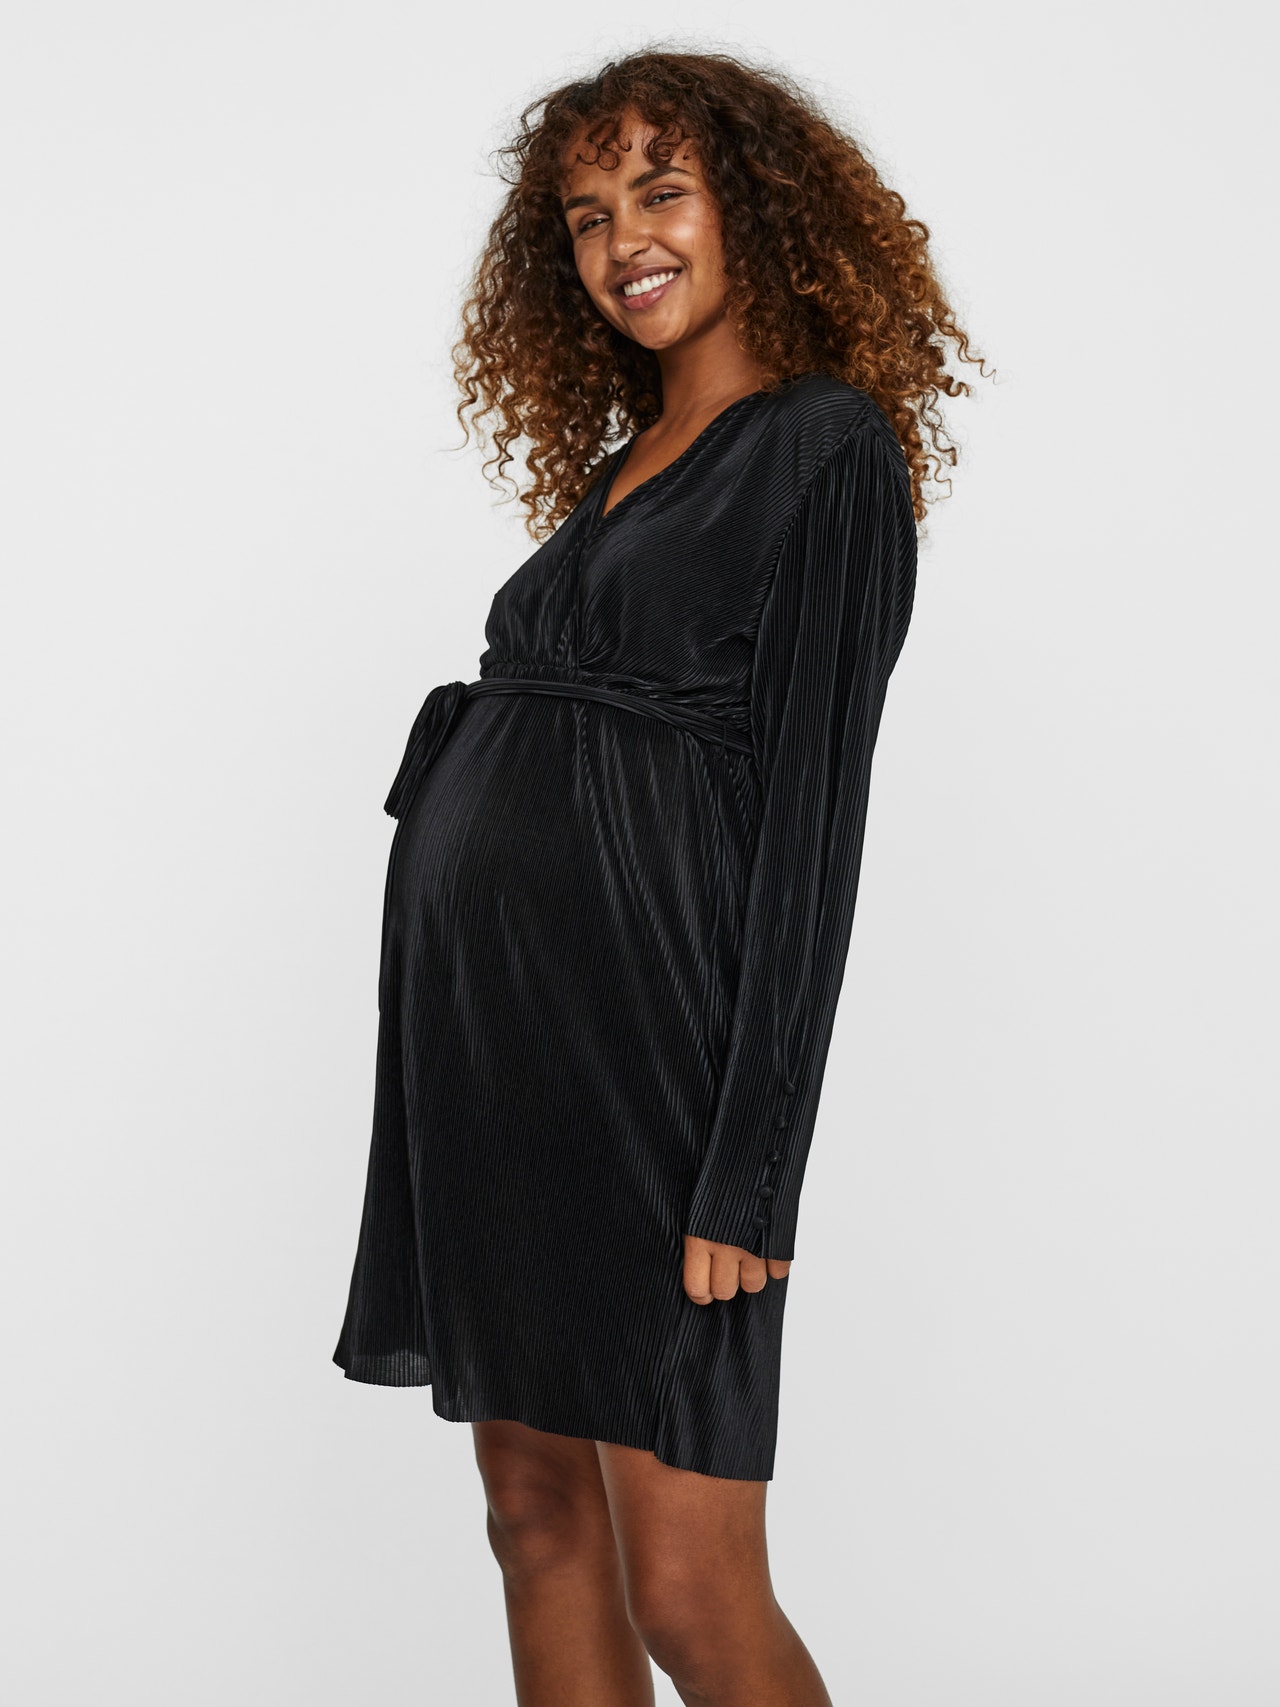 MAMA.LICIOUS Robe courte Regular Fit Col rond -Black - 20019625